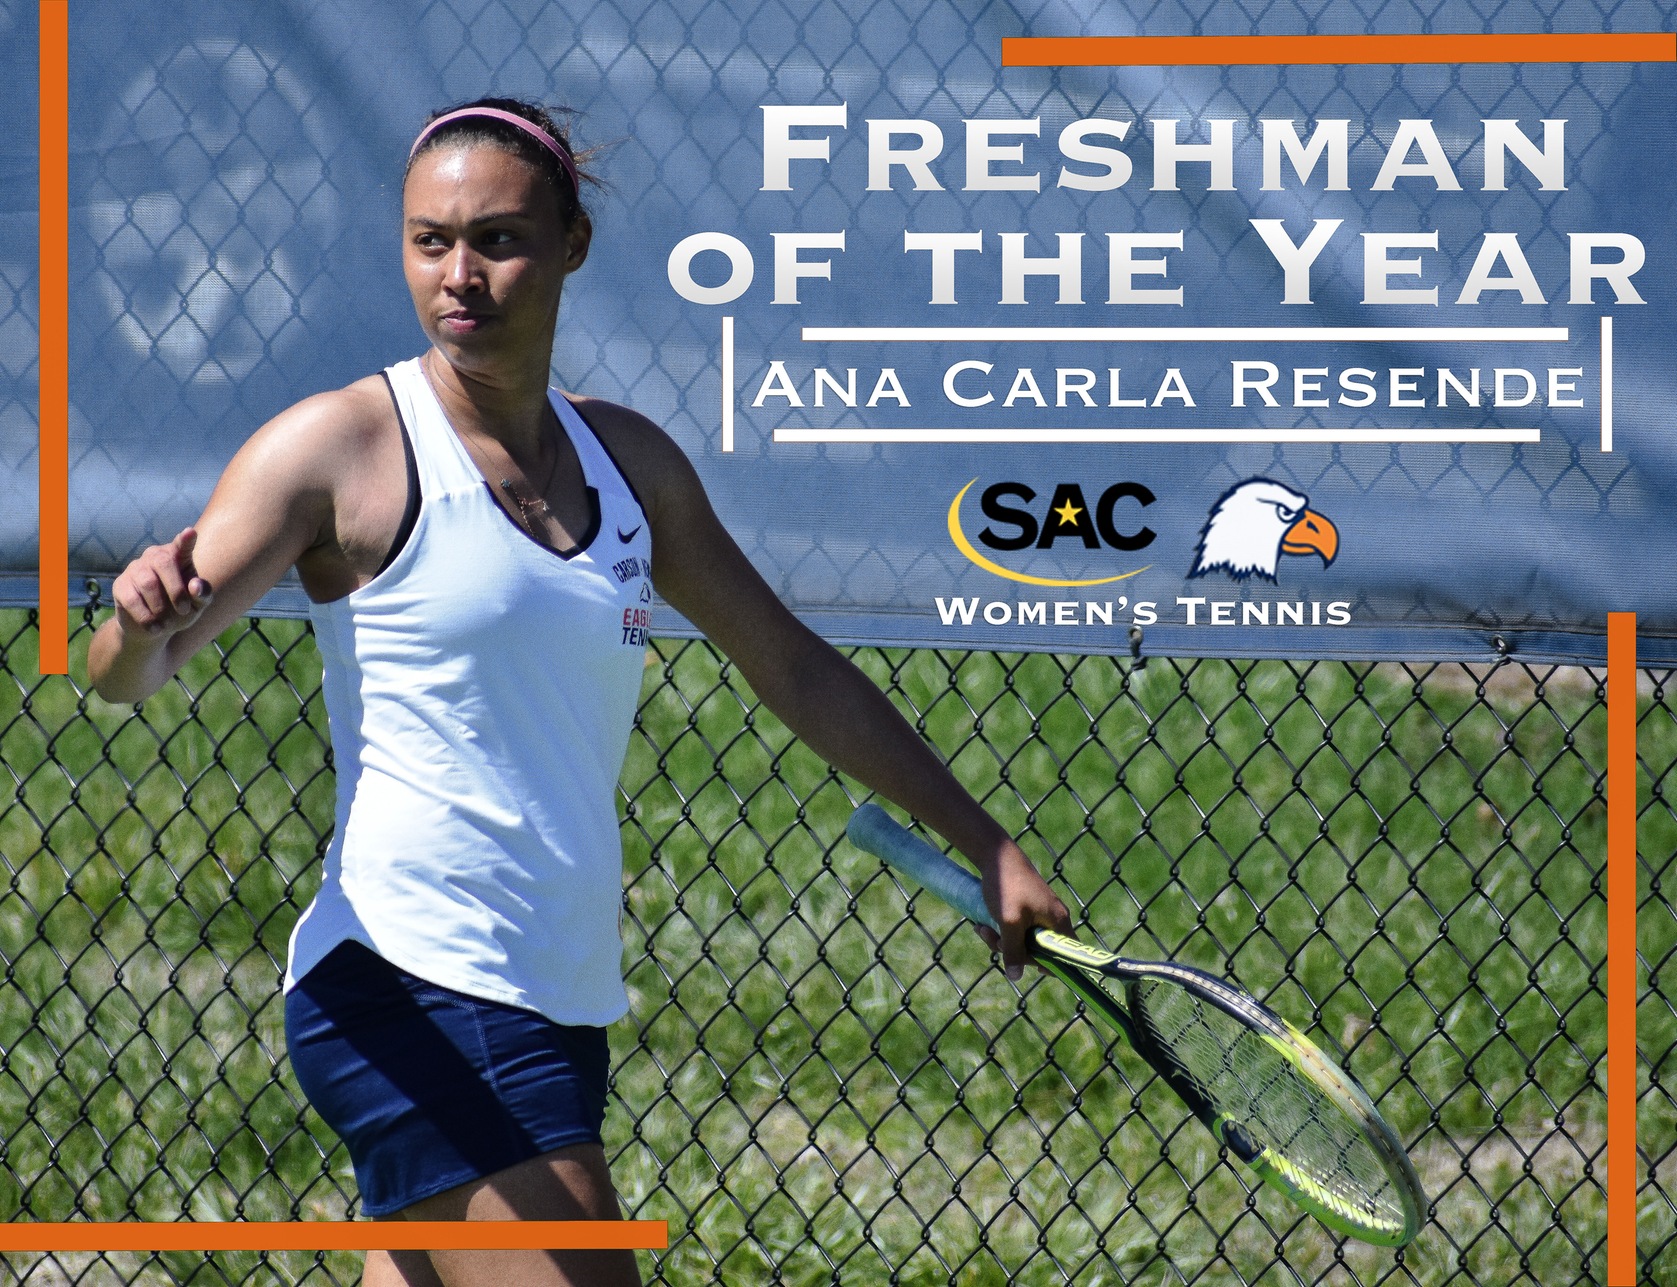 Resende earns Freshman of the Year and First-Team Singles after debut season